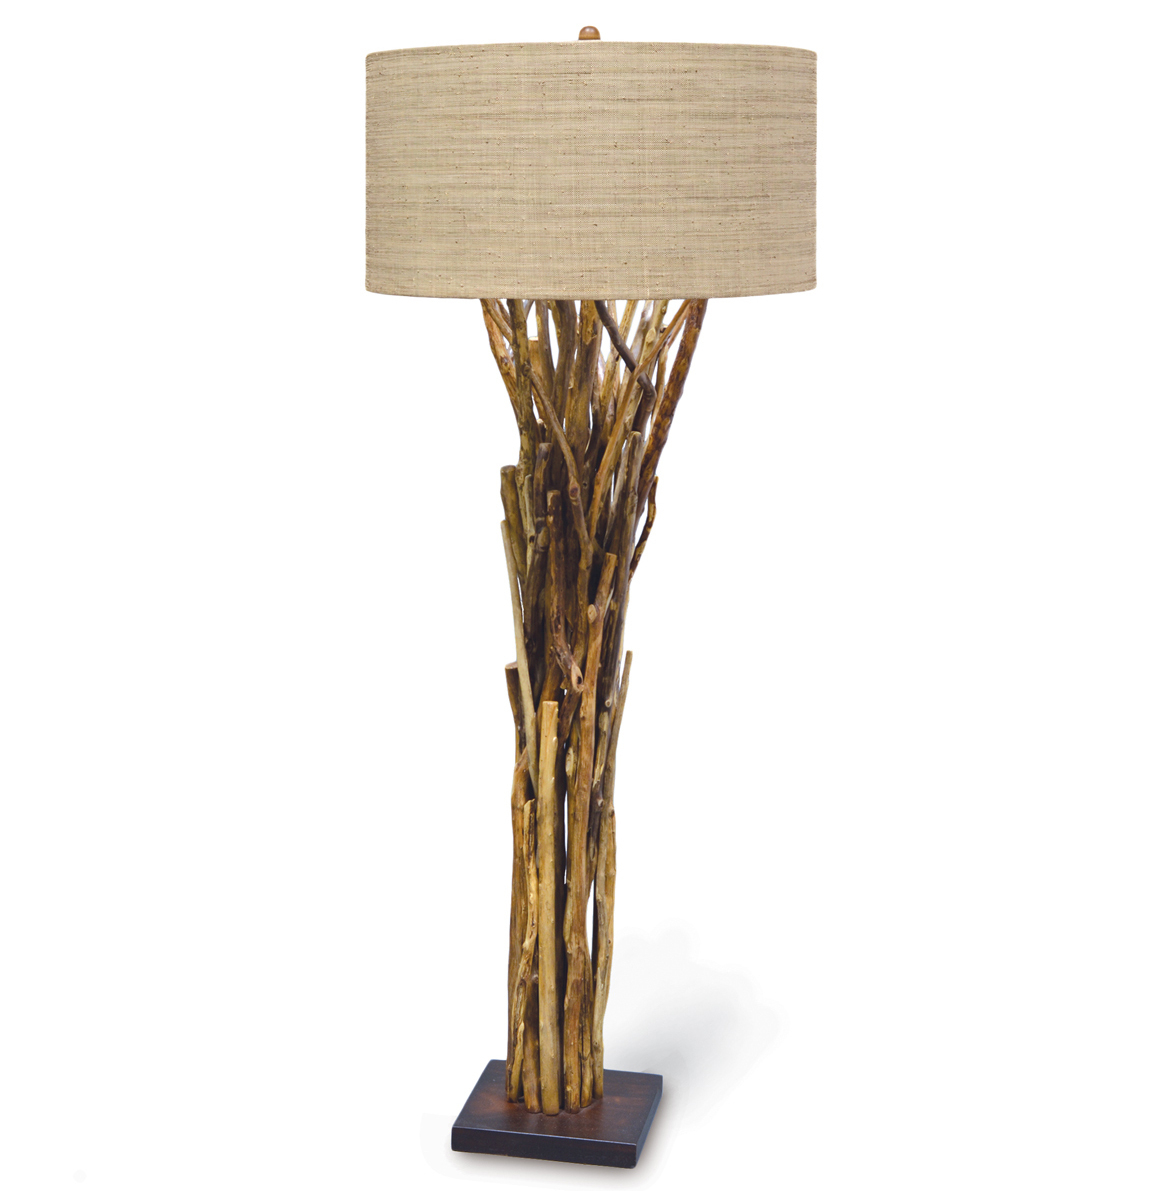 Umber Rustic Lodge Bundled Branches Floor Lamp S Transitional Floor Lamps